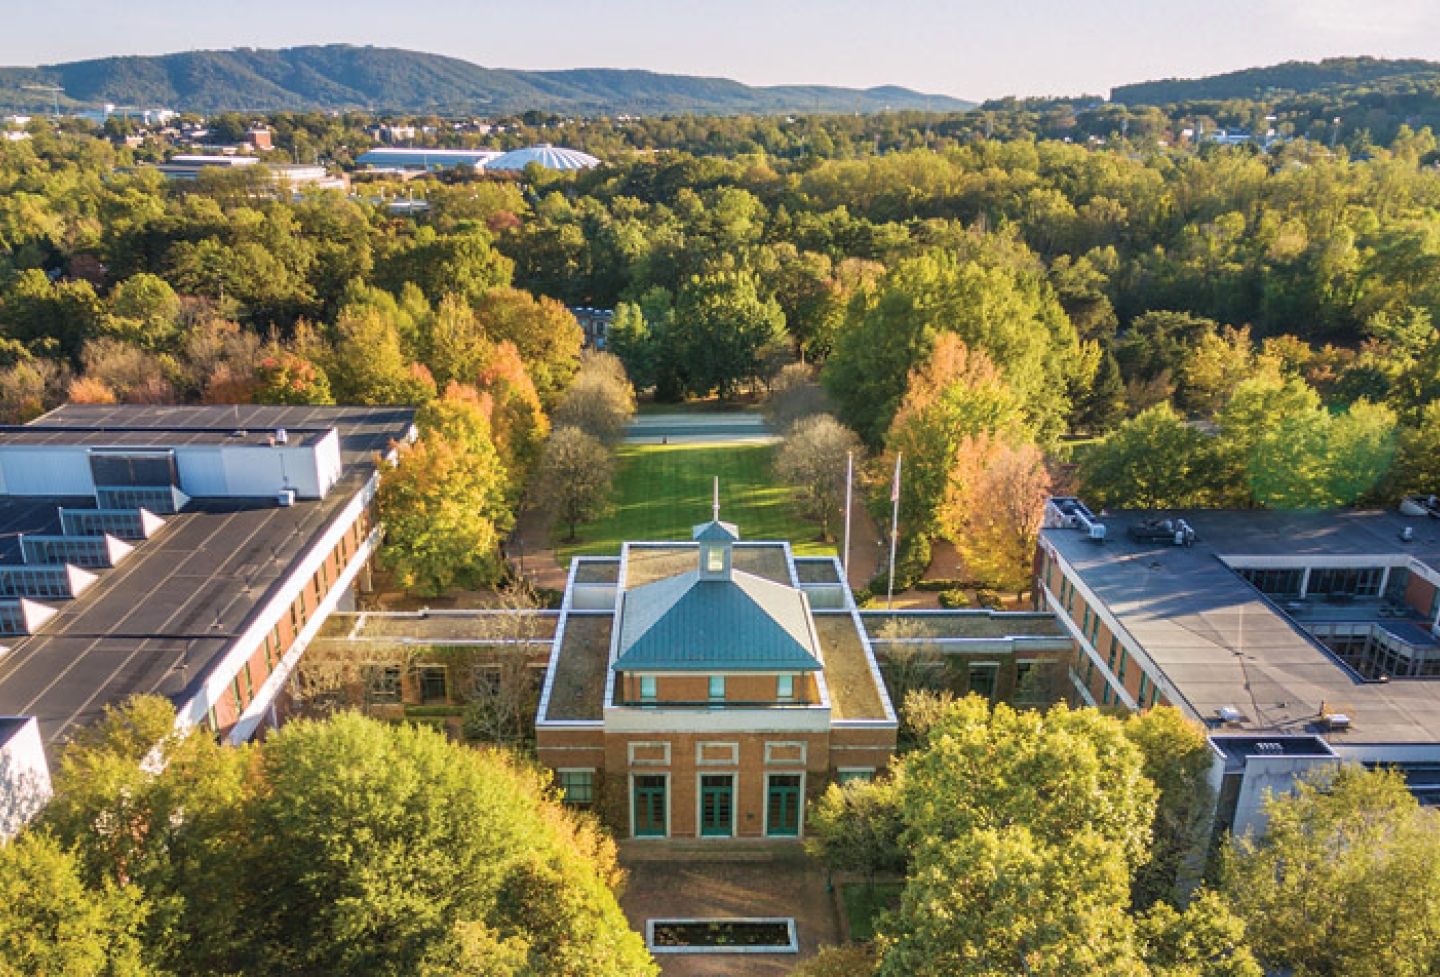 Aerial view of the law school